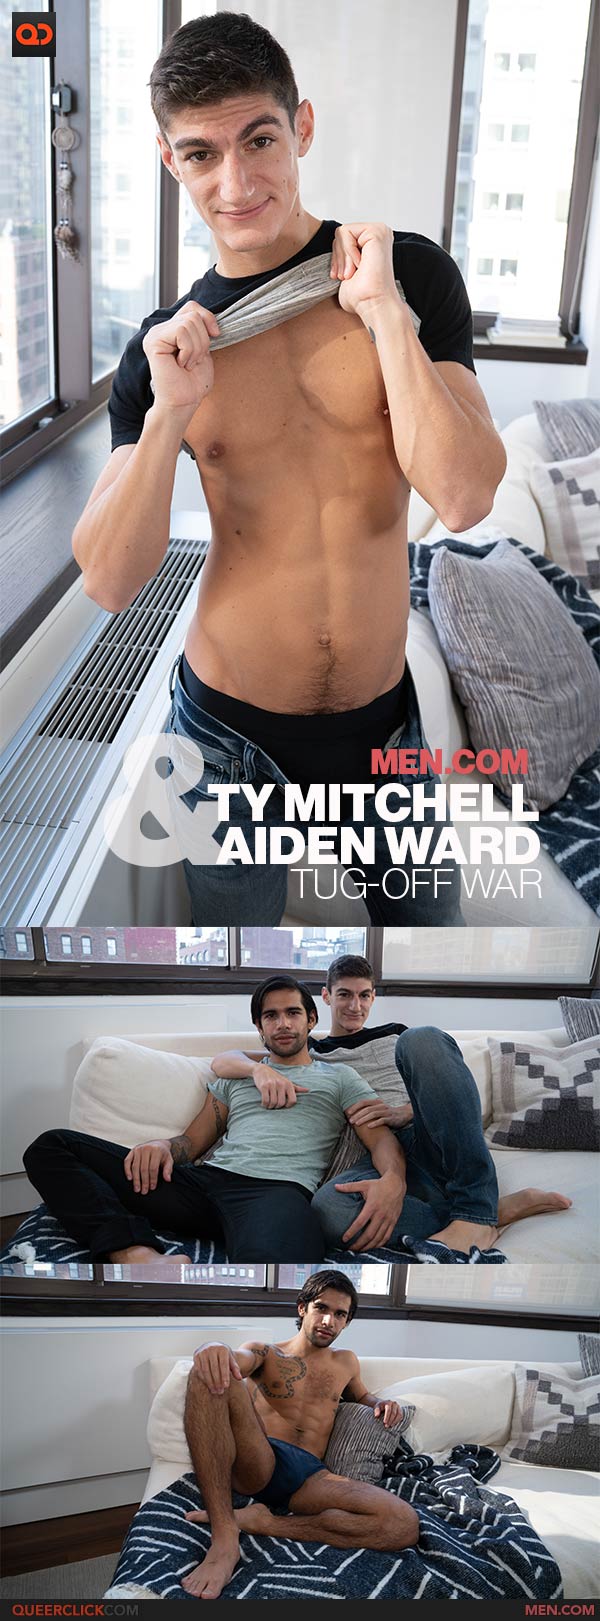 Men.com: Ty Mitchell and Aiden Ward